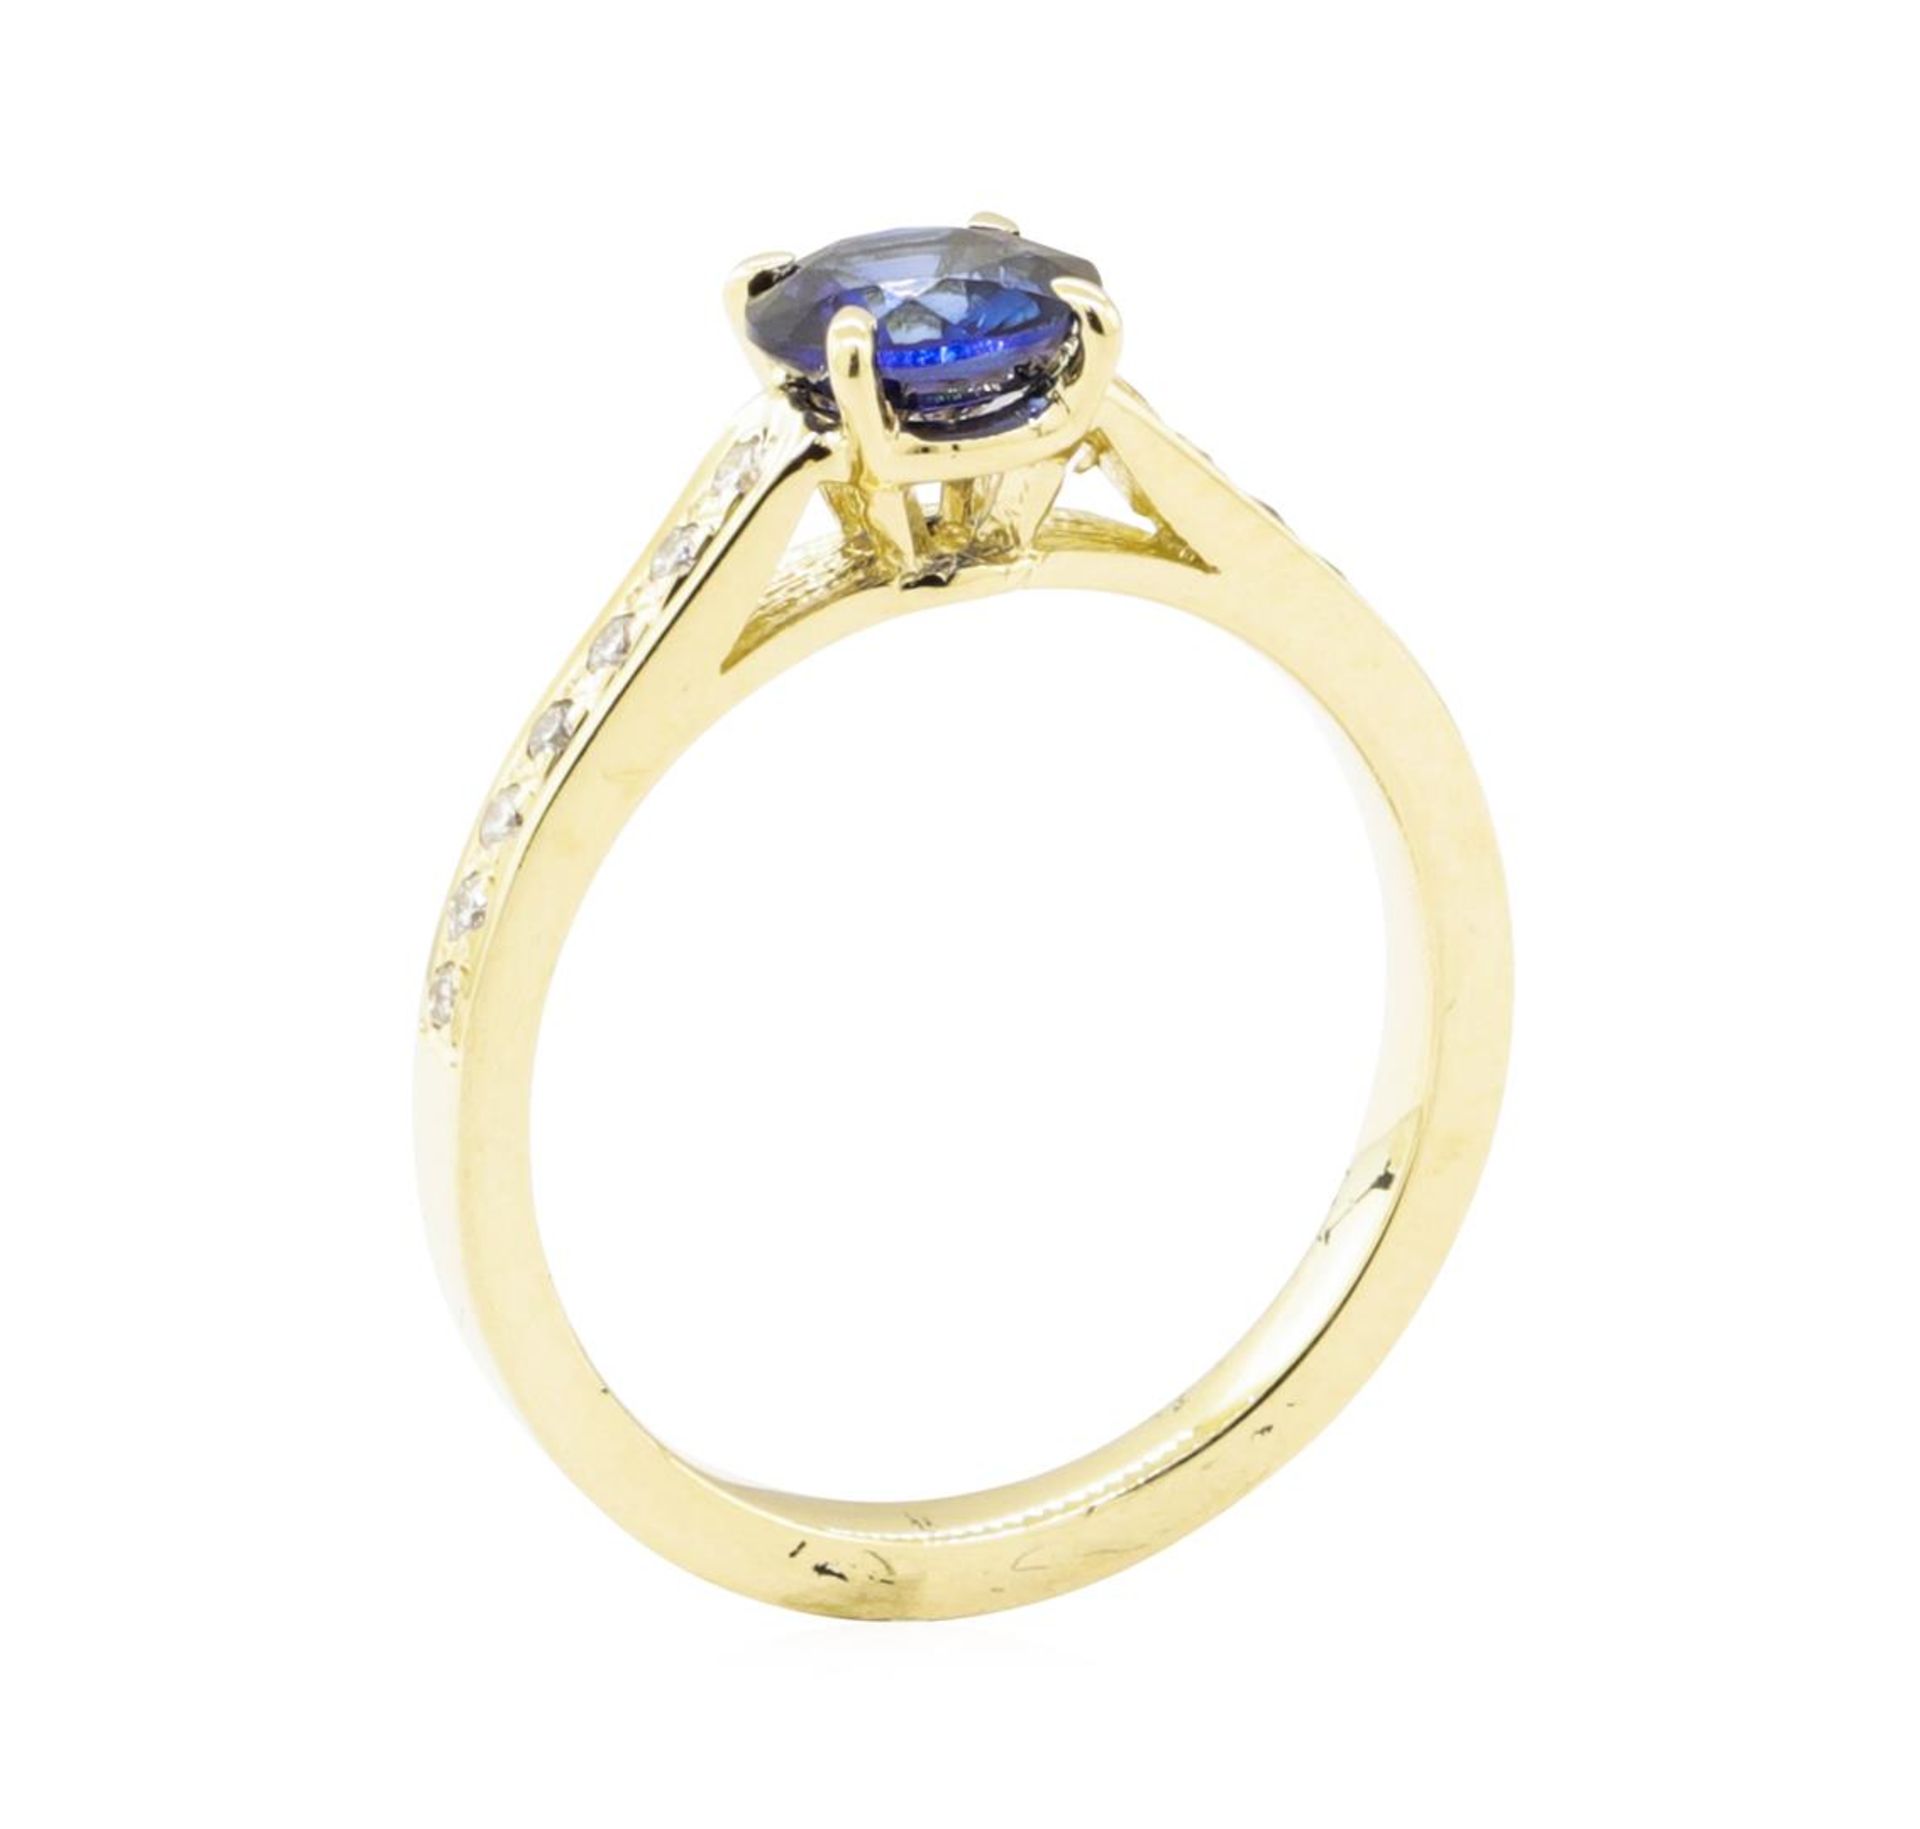 1.28ctw Blue Sapphire and Diamond Ring - 14KT Yellow Gold - Image 4 of 4